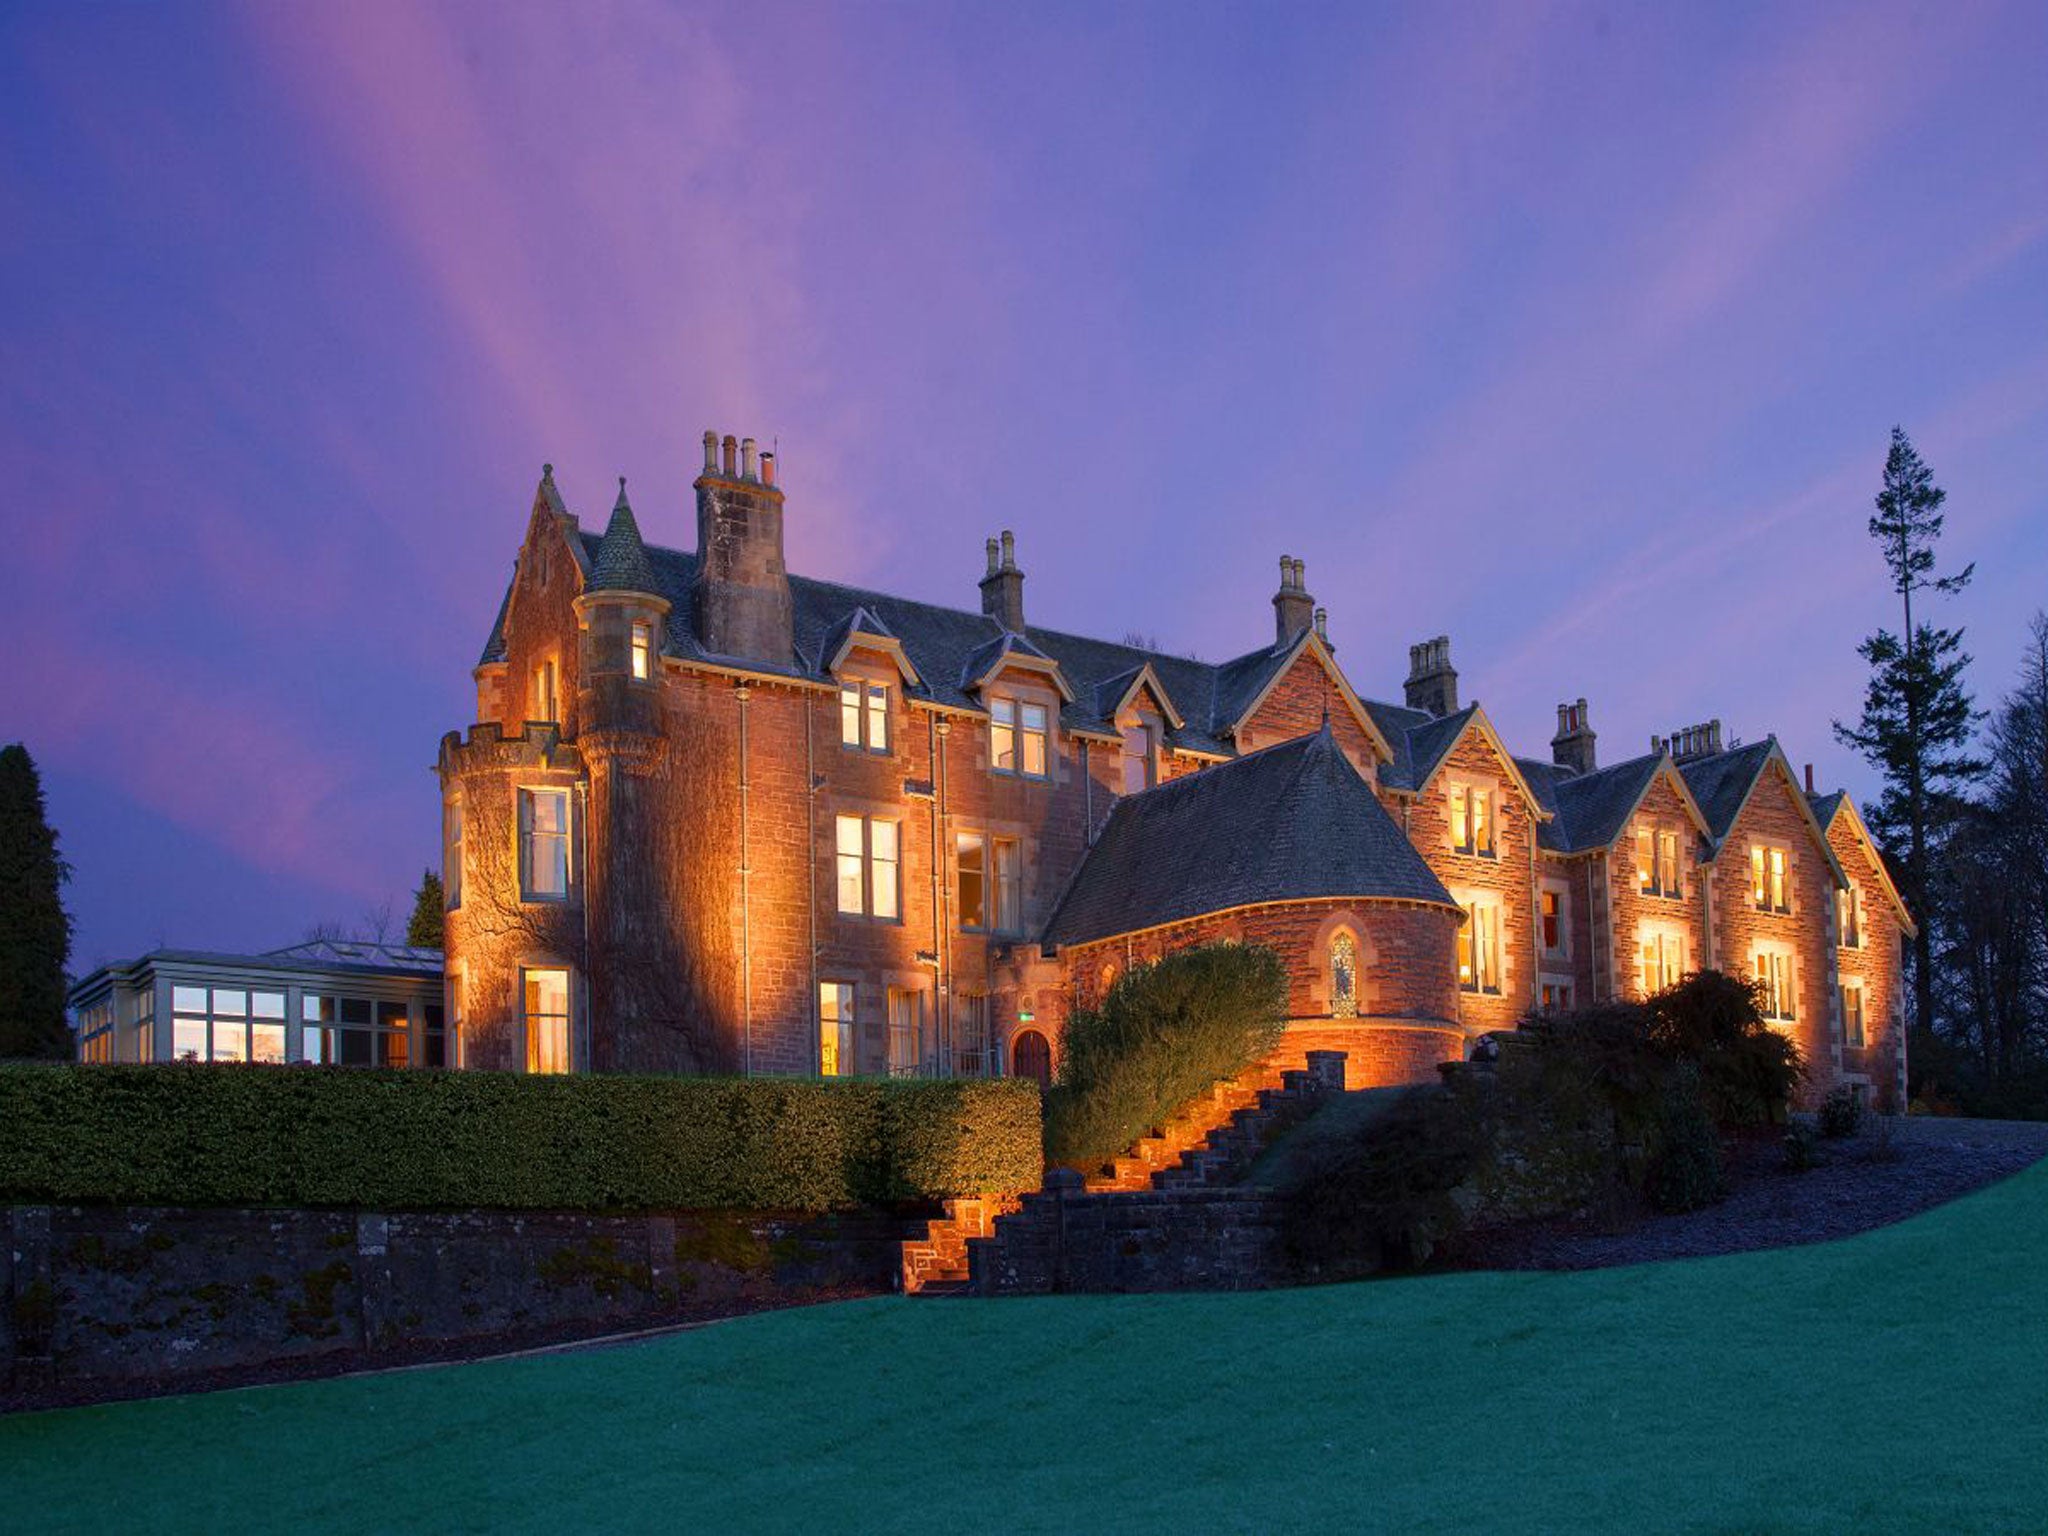 Andy Murray's Cromlix House Hotel in Kinbuck, Perthshire, has been crowned the Scottish Hotel of the Year